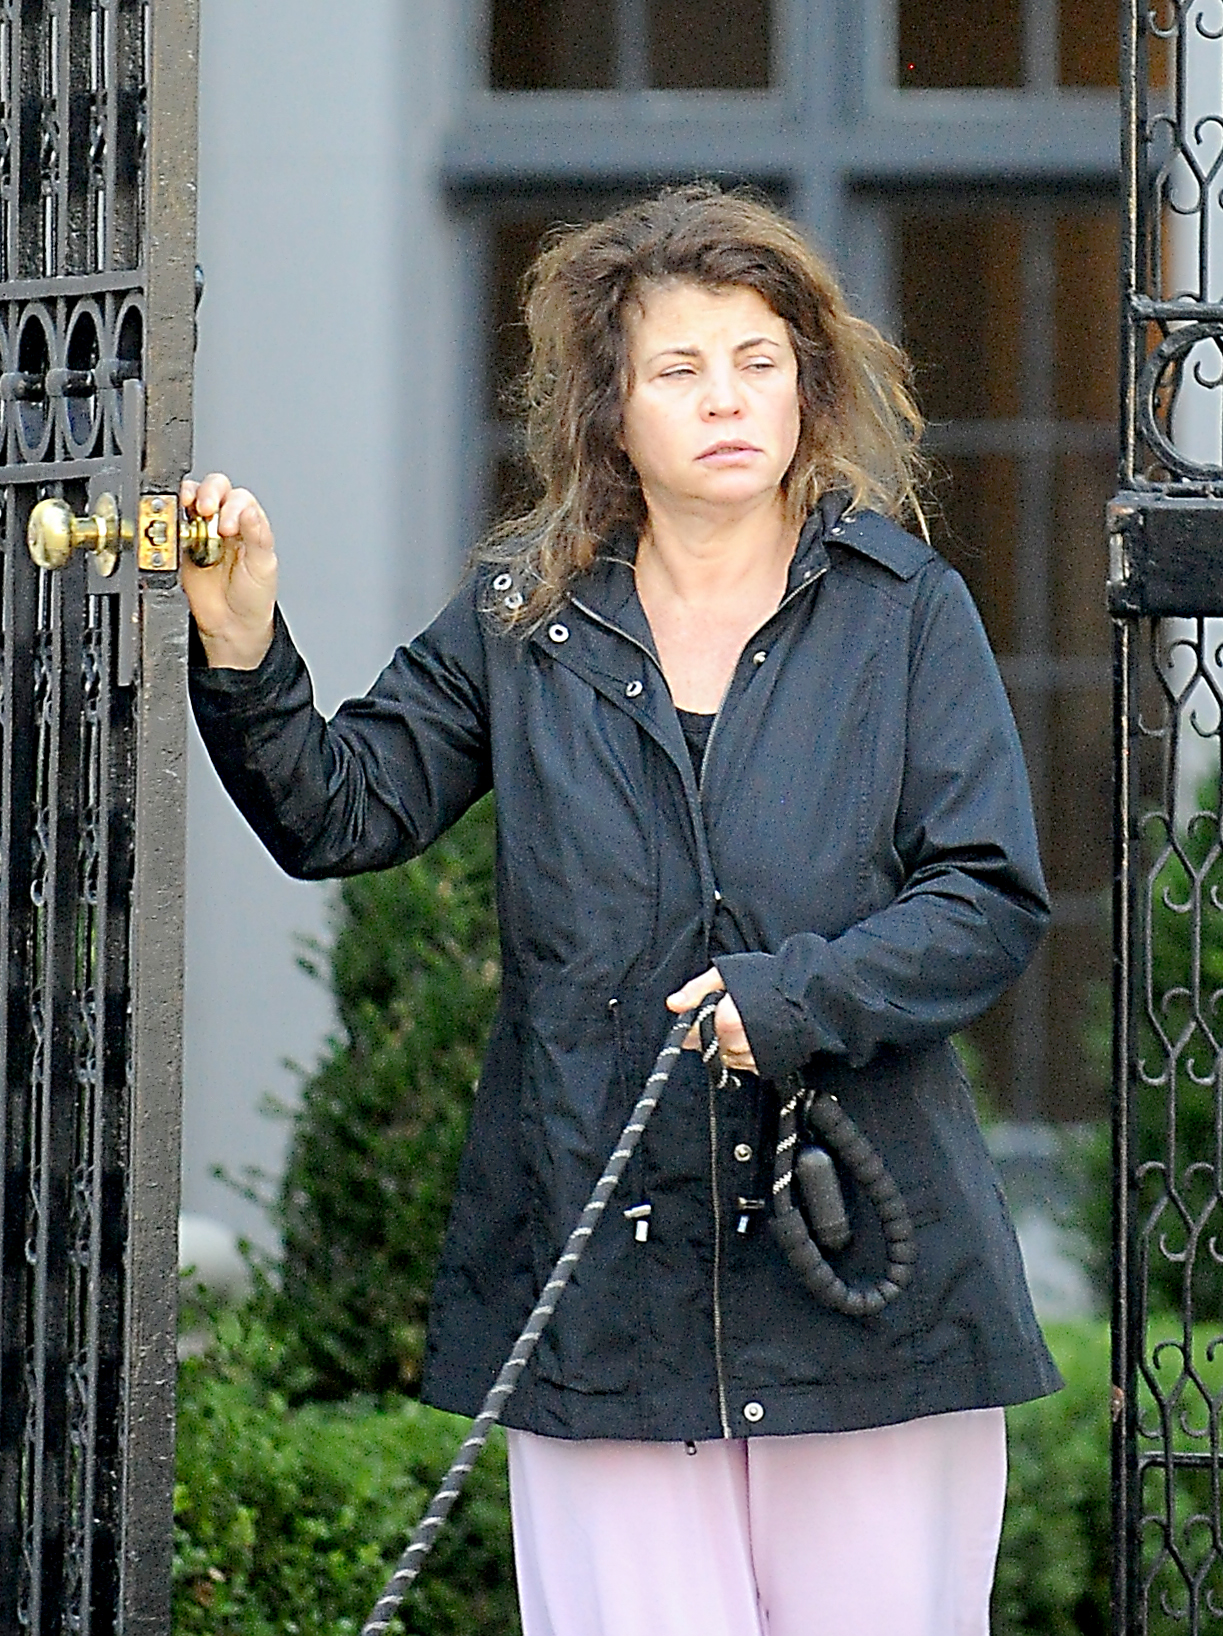 Yasmine Bleeth has not acted since 2003 and now looks unrecognizable (seen here in October 2022)